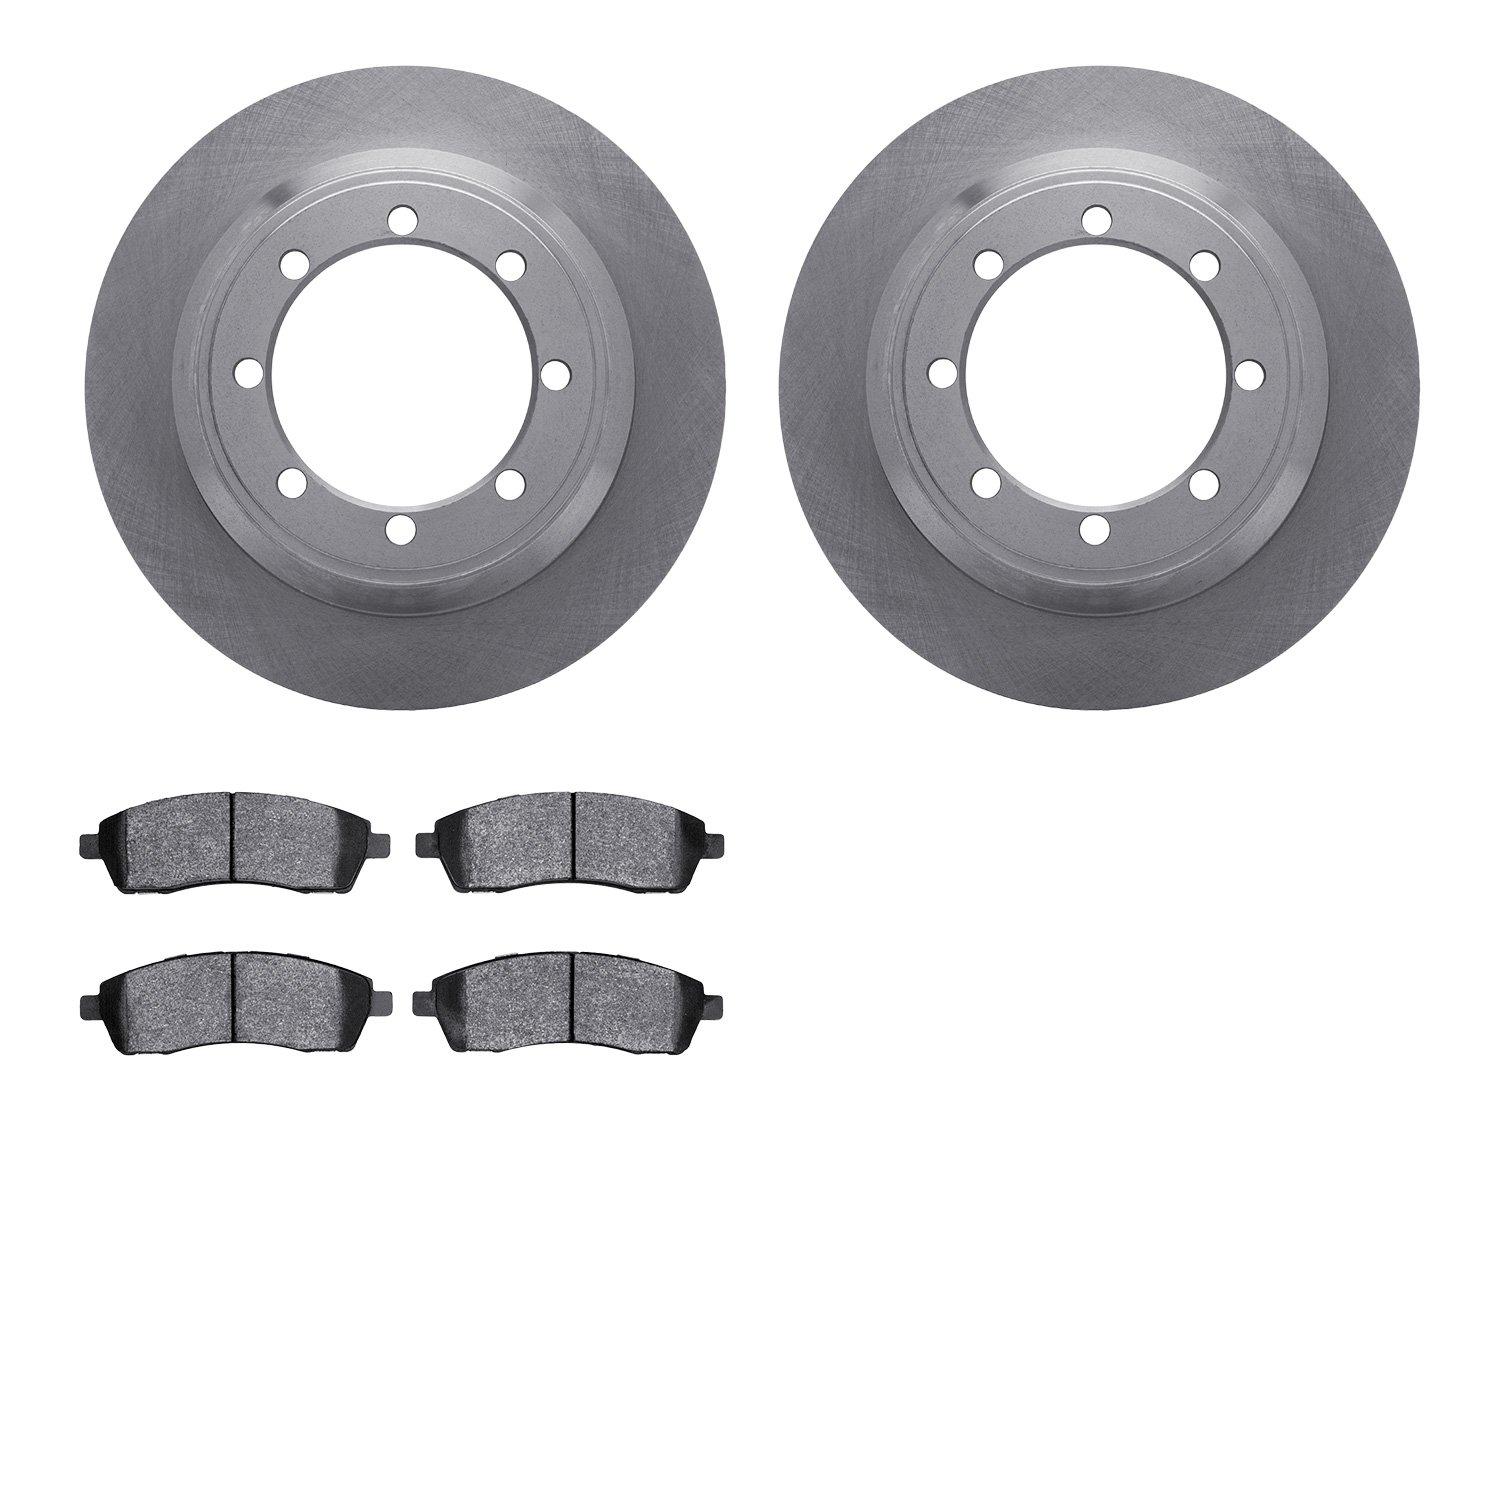 6402-54137 Brake Rotors with Ultimate-Duty Brake Pads, 1999-2004 Ford/Lincoln/Mercury/Mazda, Position: Rear